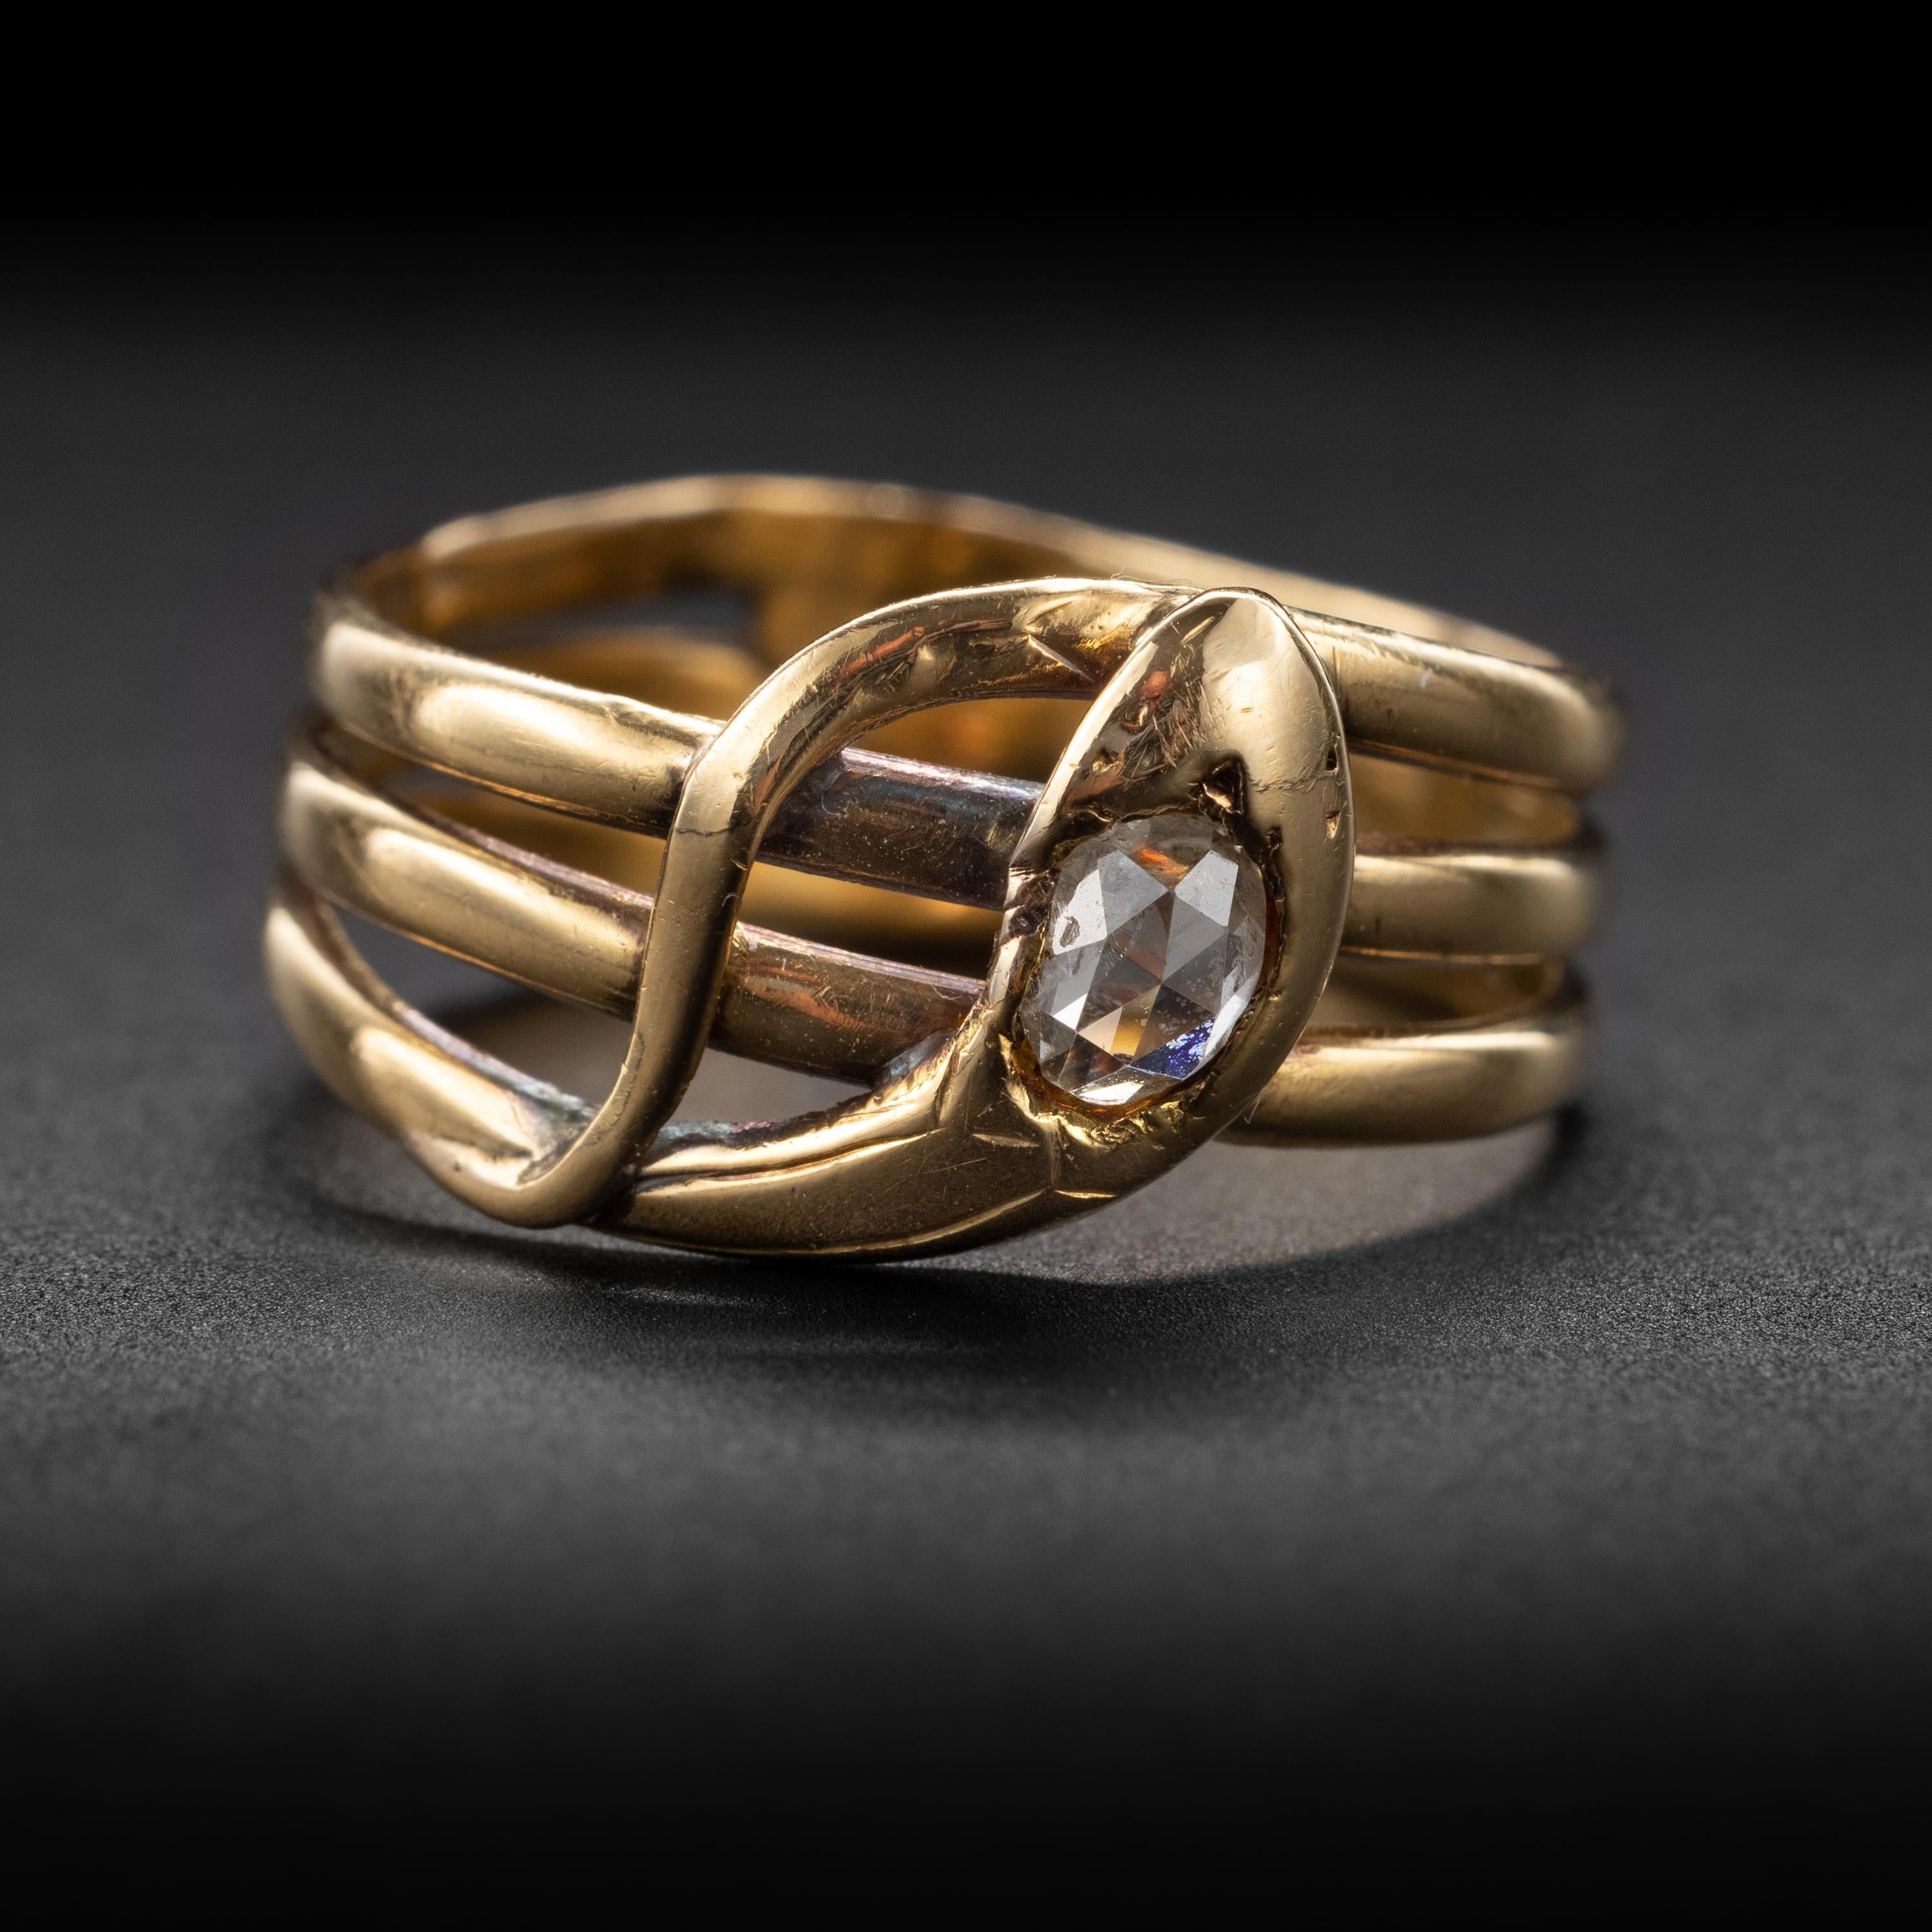 Much old jewelry becomes old jewelry of interest to nobody. Snake rings are one exception; they are more popiolar now than when they were first created.  This luxuriousn18K yellow gold antique ring was entirely hand-crafted in the late 19th century.